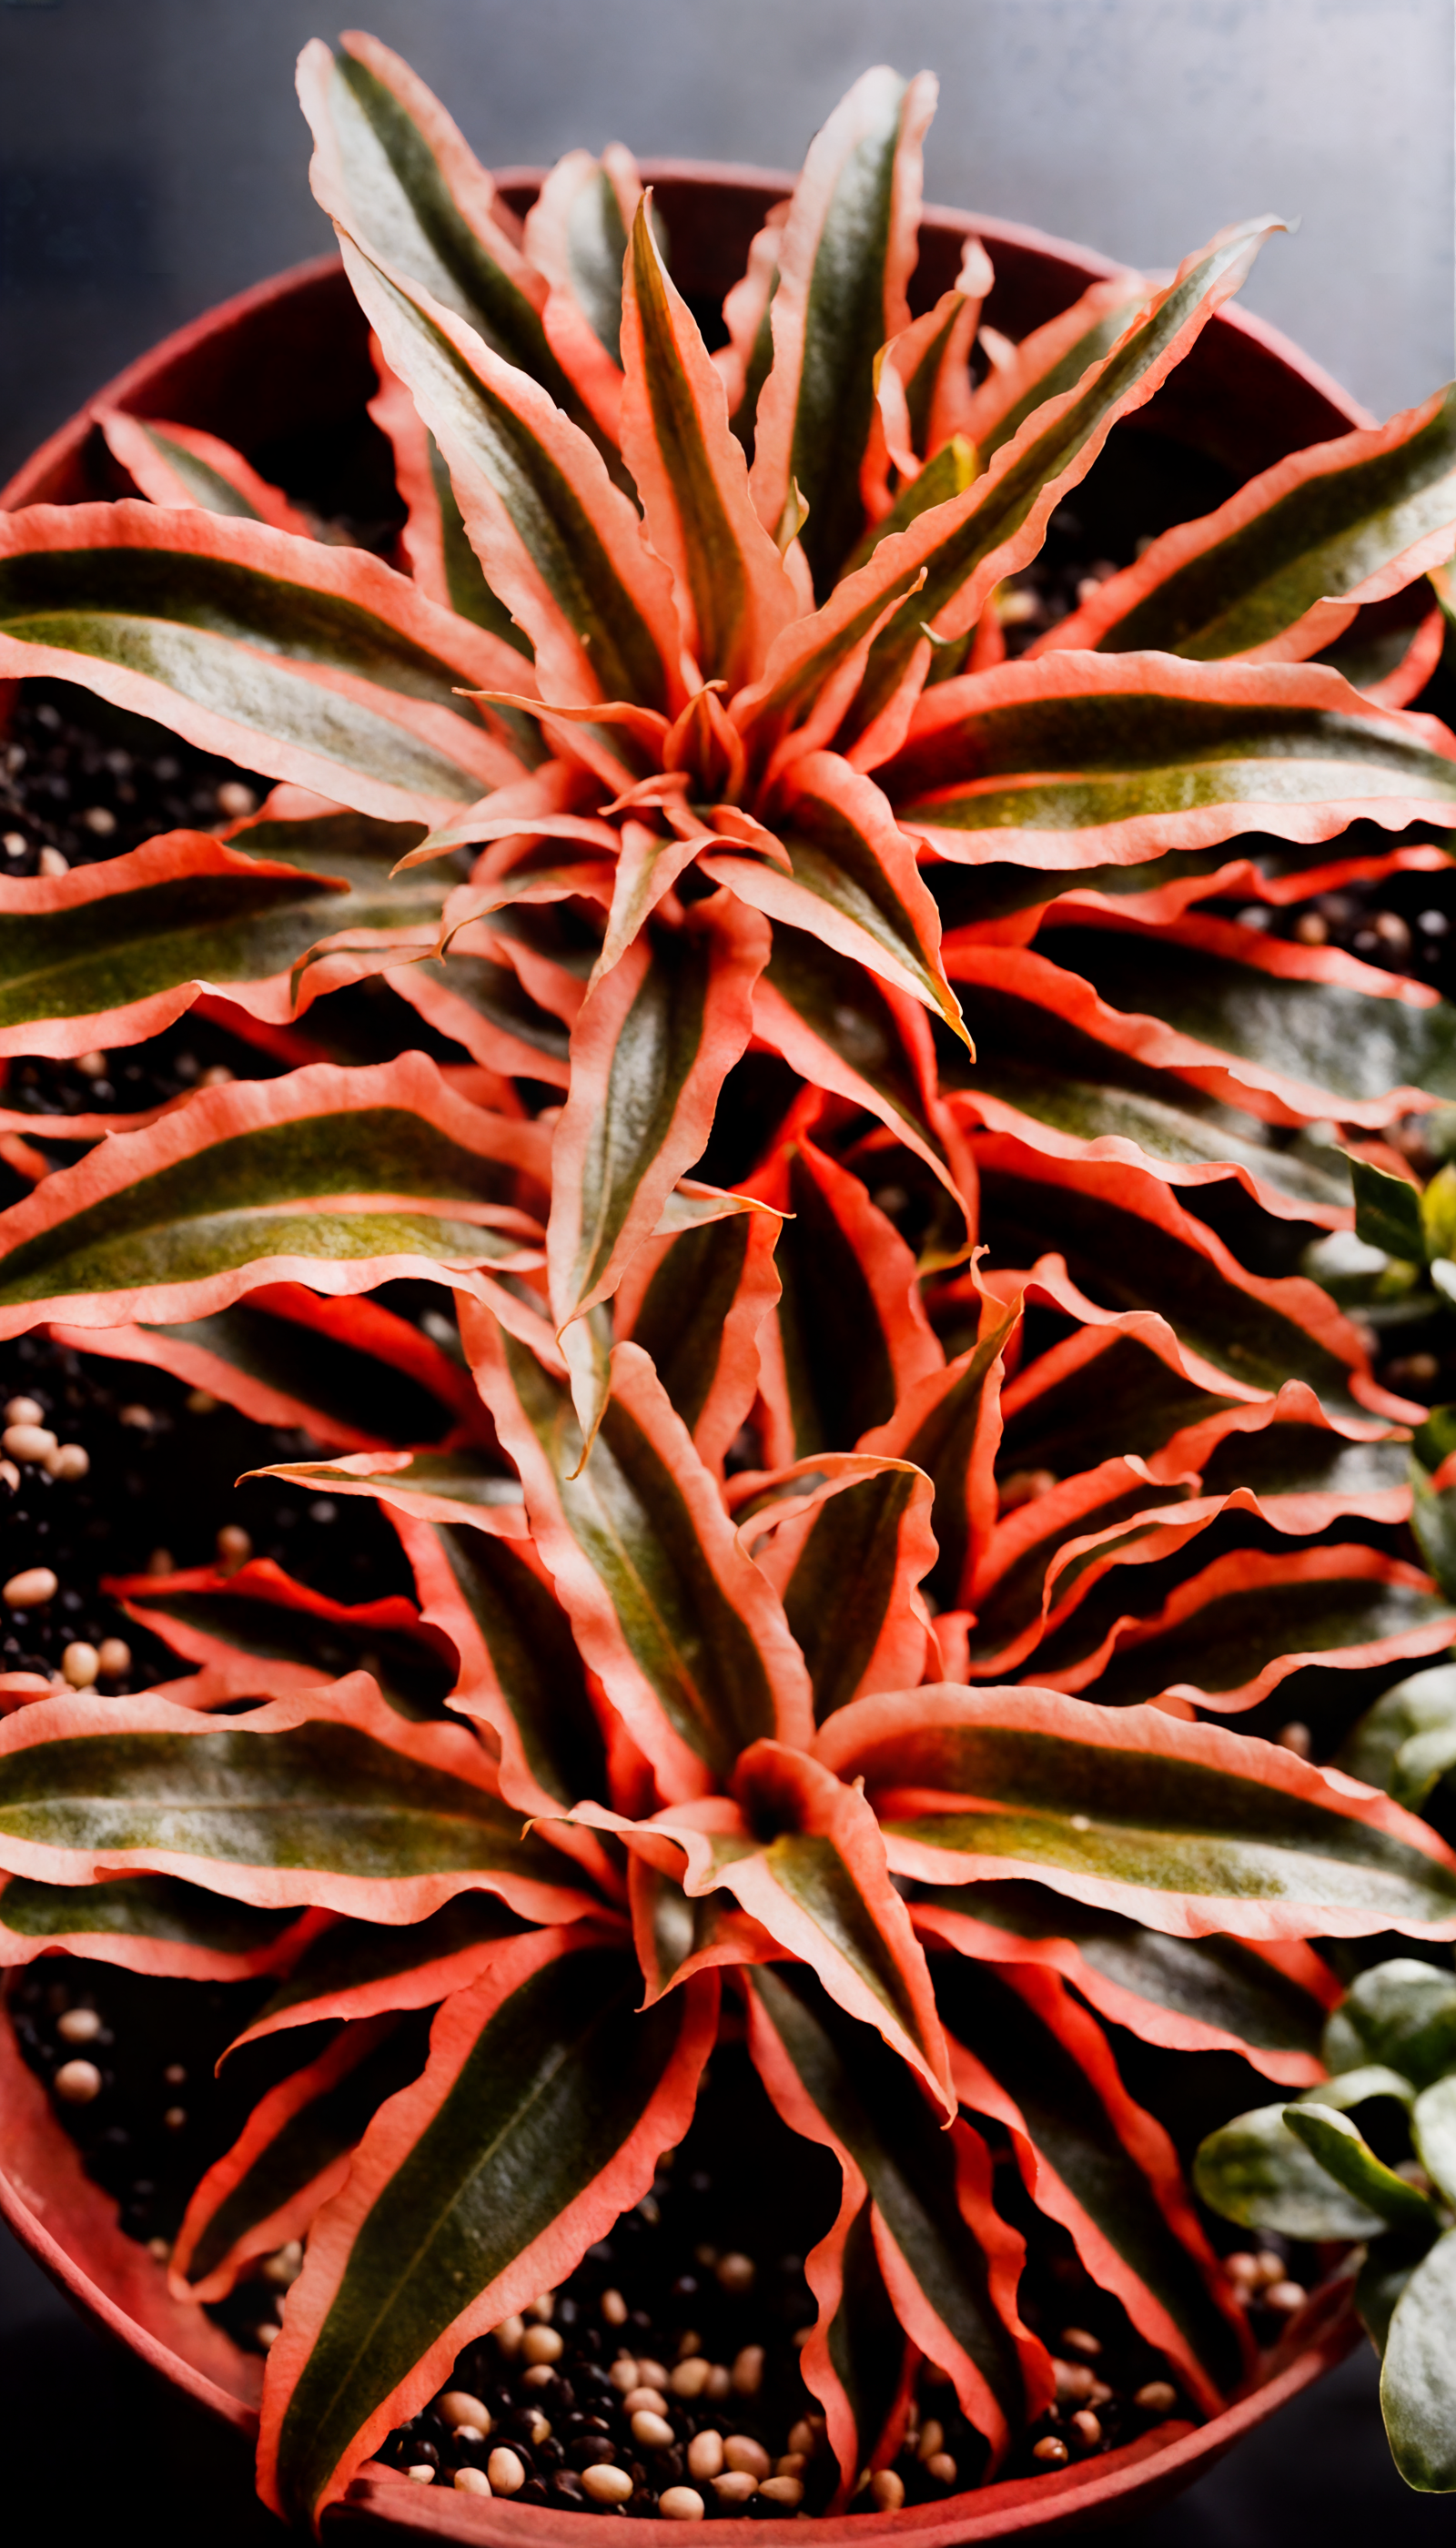 Cryptanthus bivittatus with striped leaves in a red bowl, clear indoor lighting, against a dark background.